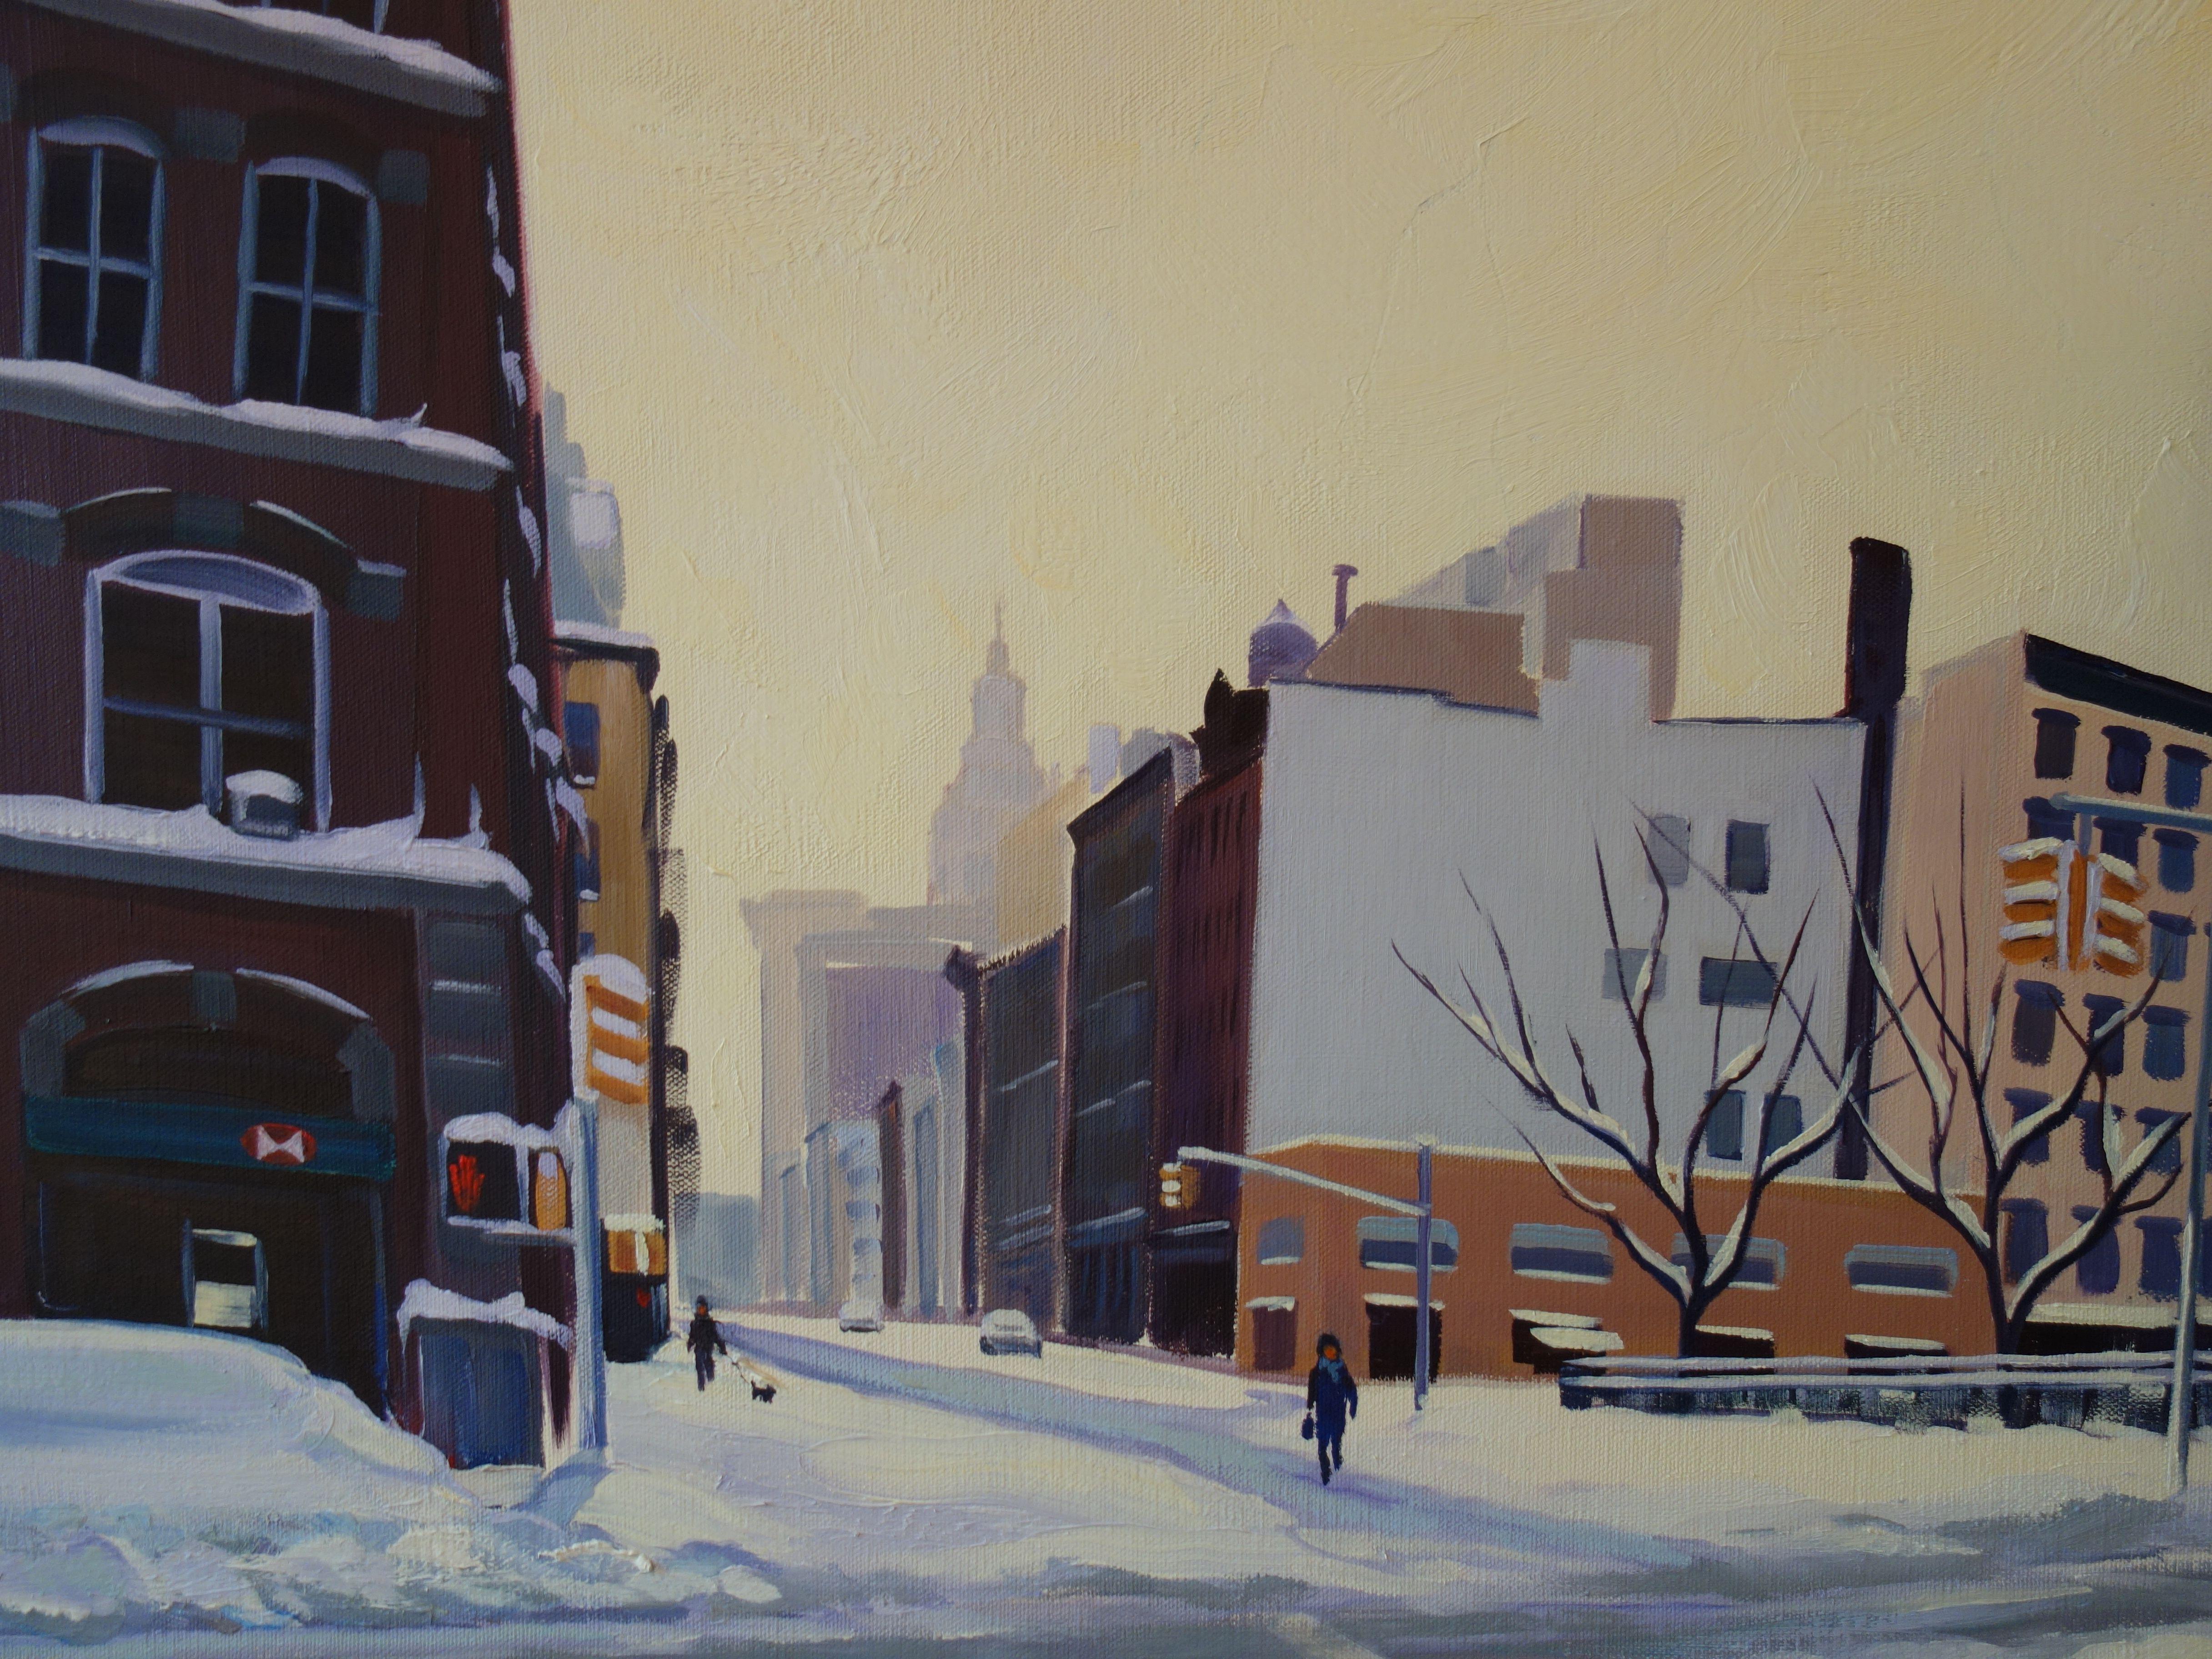 A beautiful still winter's day in Tribeca, lower Manhattan. New York City is hushed in a snowstorm and wonderfully tranquil! This is Bogardus Square. Lone figures brave the elements, and the iconic Woolworth Building graces the skyline! :: Painting